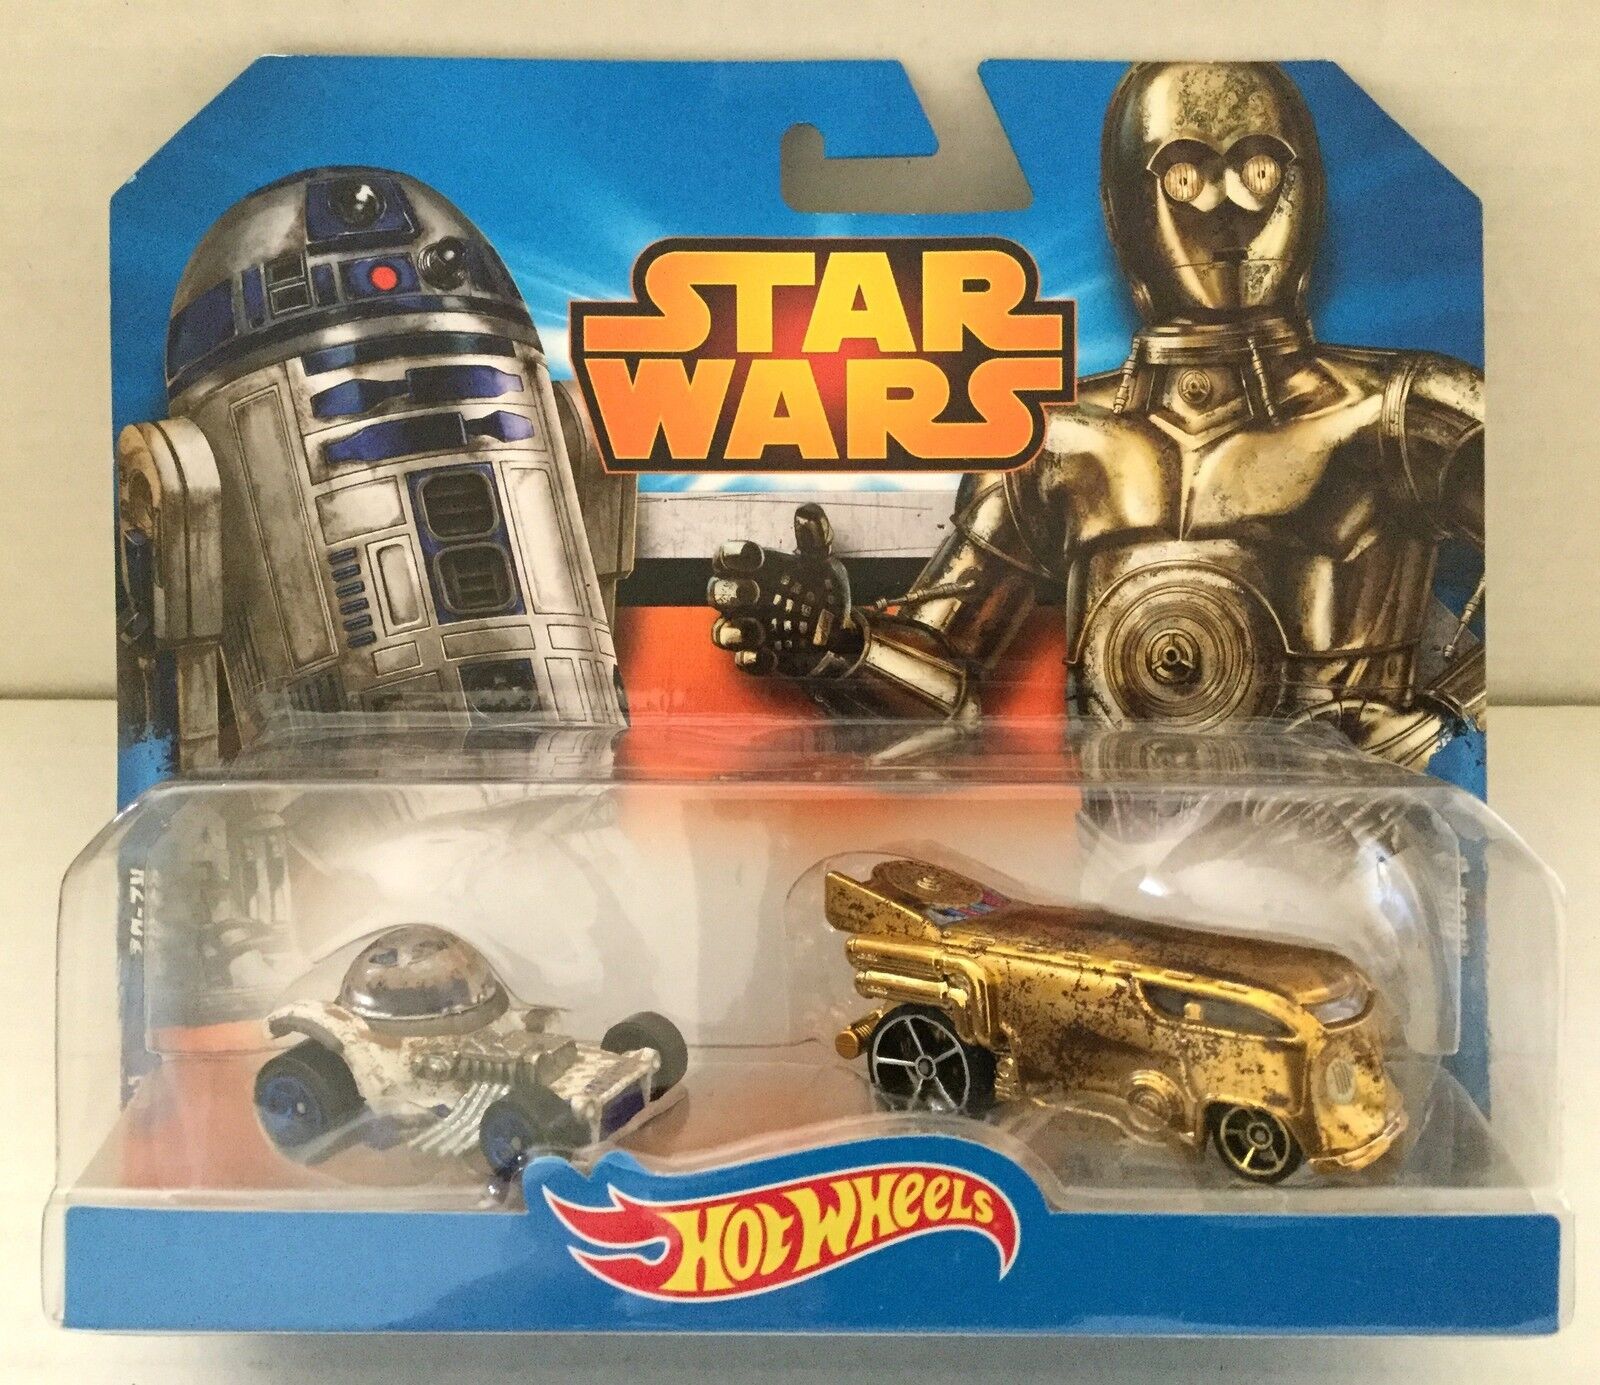 STAR WARS R2-D2 and C-3PO - 2014 Hot Wheels - VW Drag Bus & Hot Rod - VERY COOL